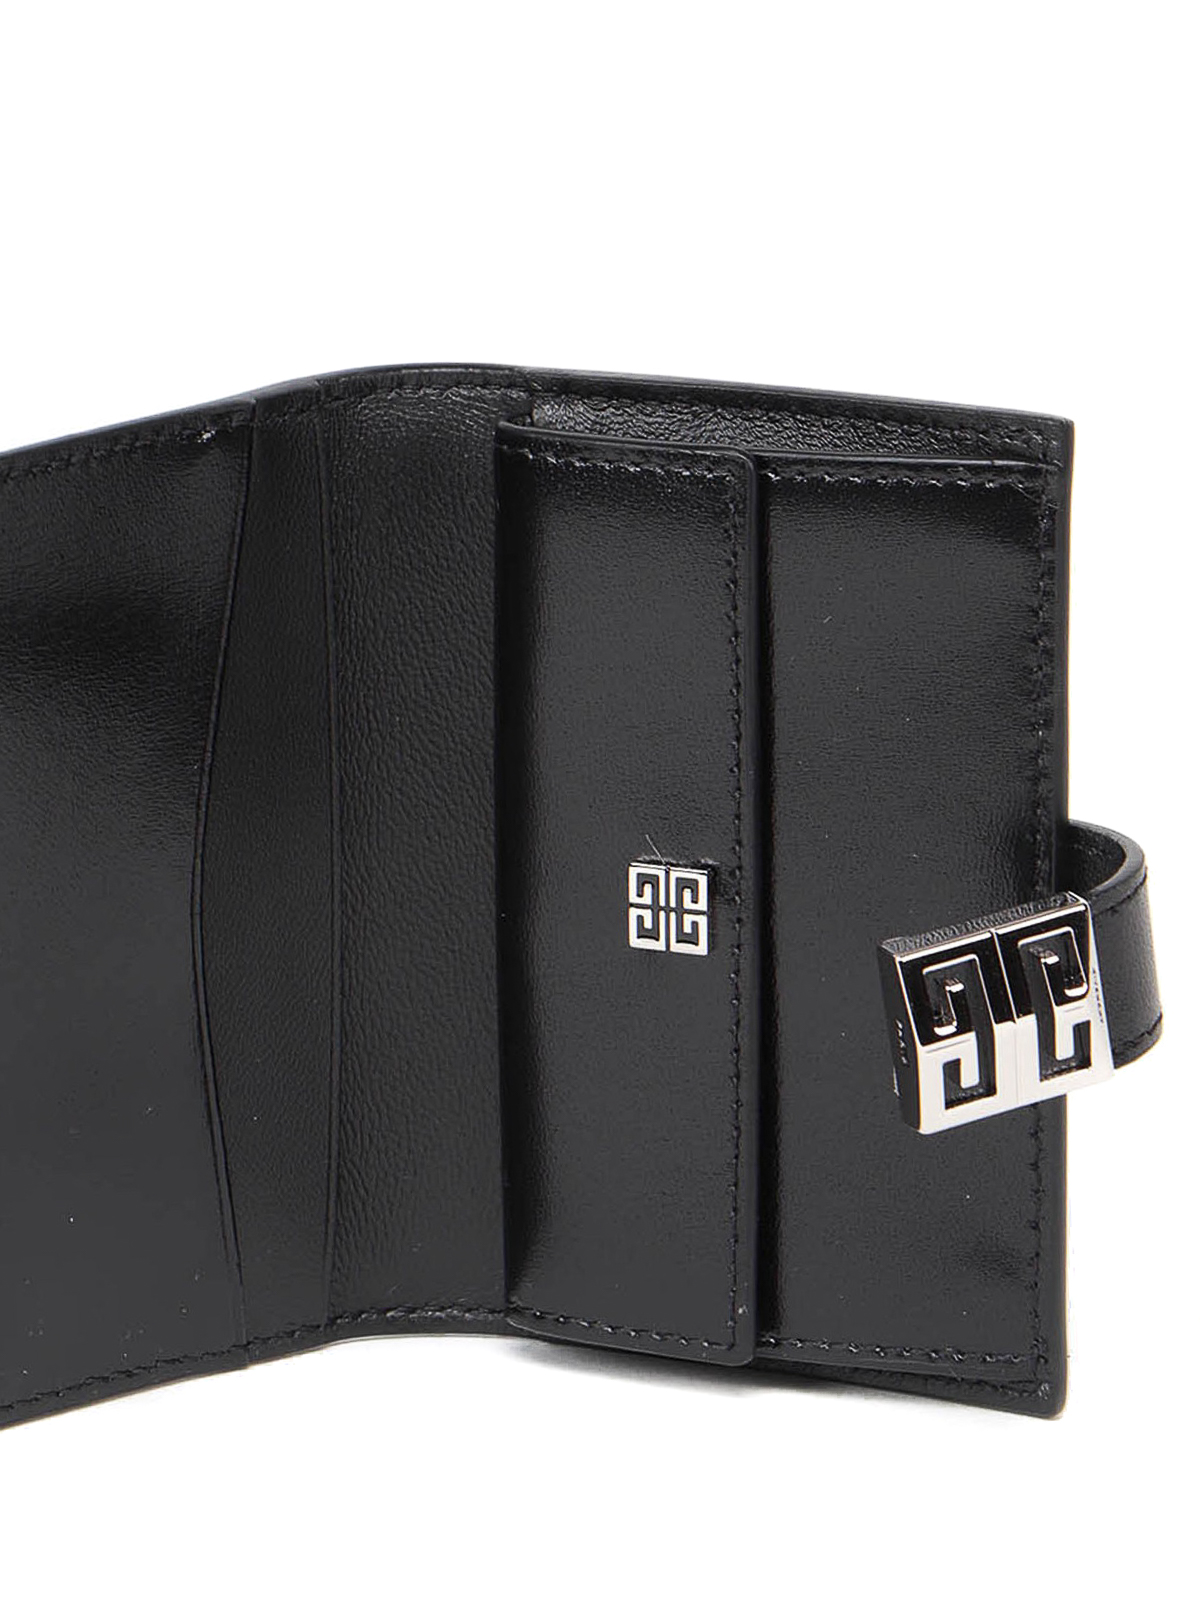 Givenchy Black Leather 4G Zipped Card Holder Givenchy